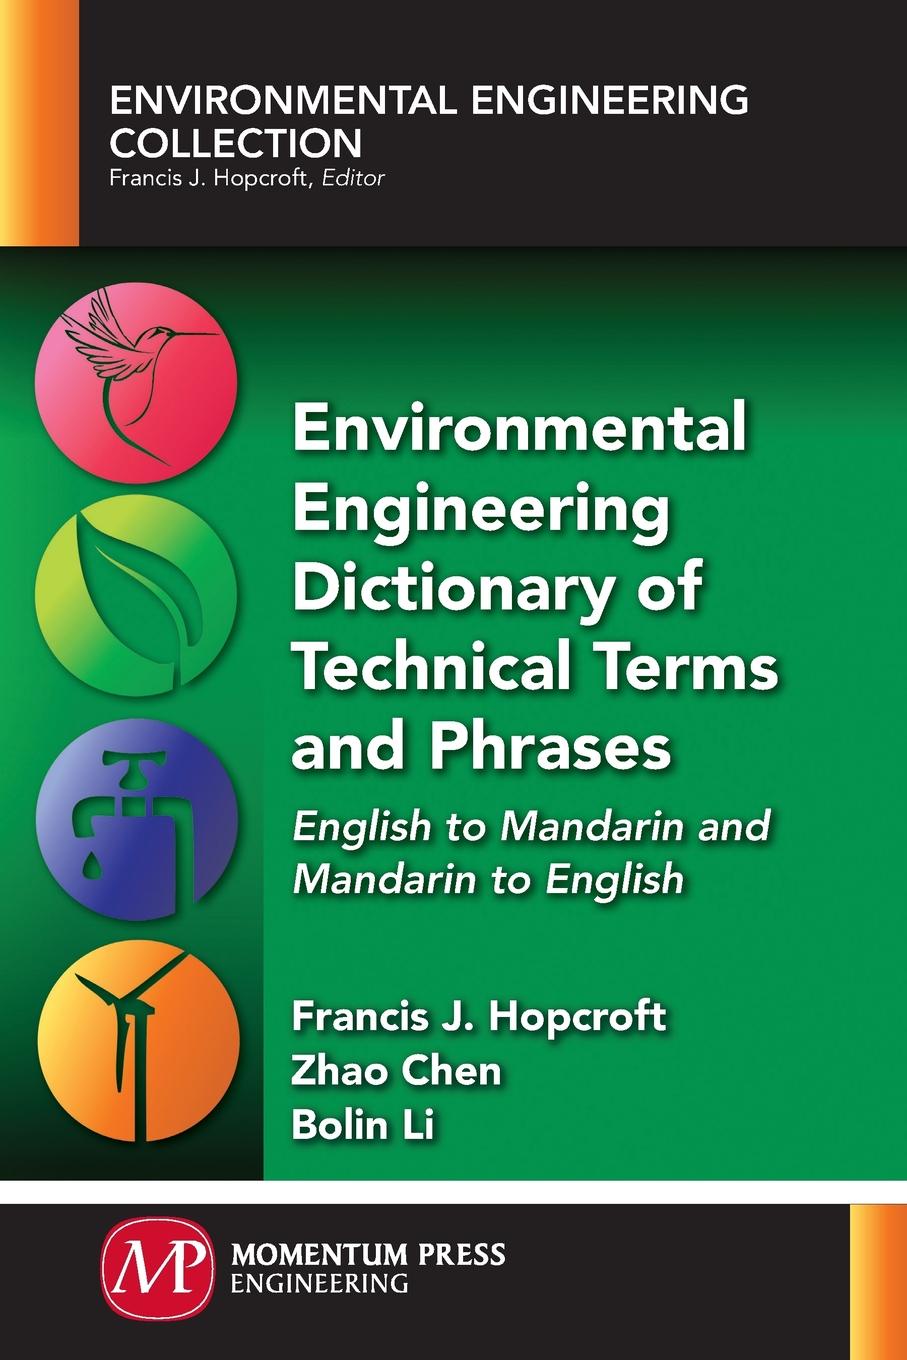 Environmental Engineering Dictionary of Technical Terms and Phrases. English to Mandarin and Mandarin to English